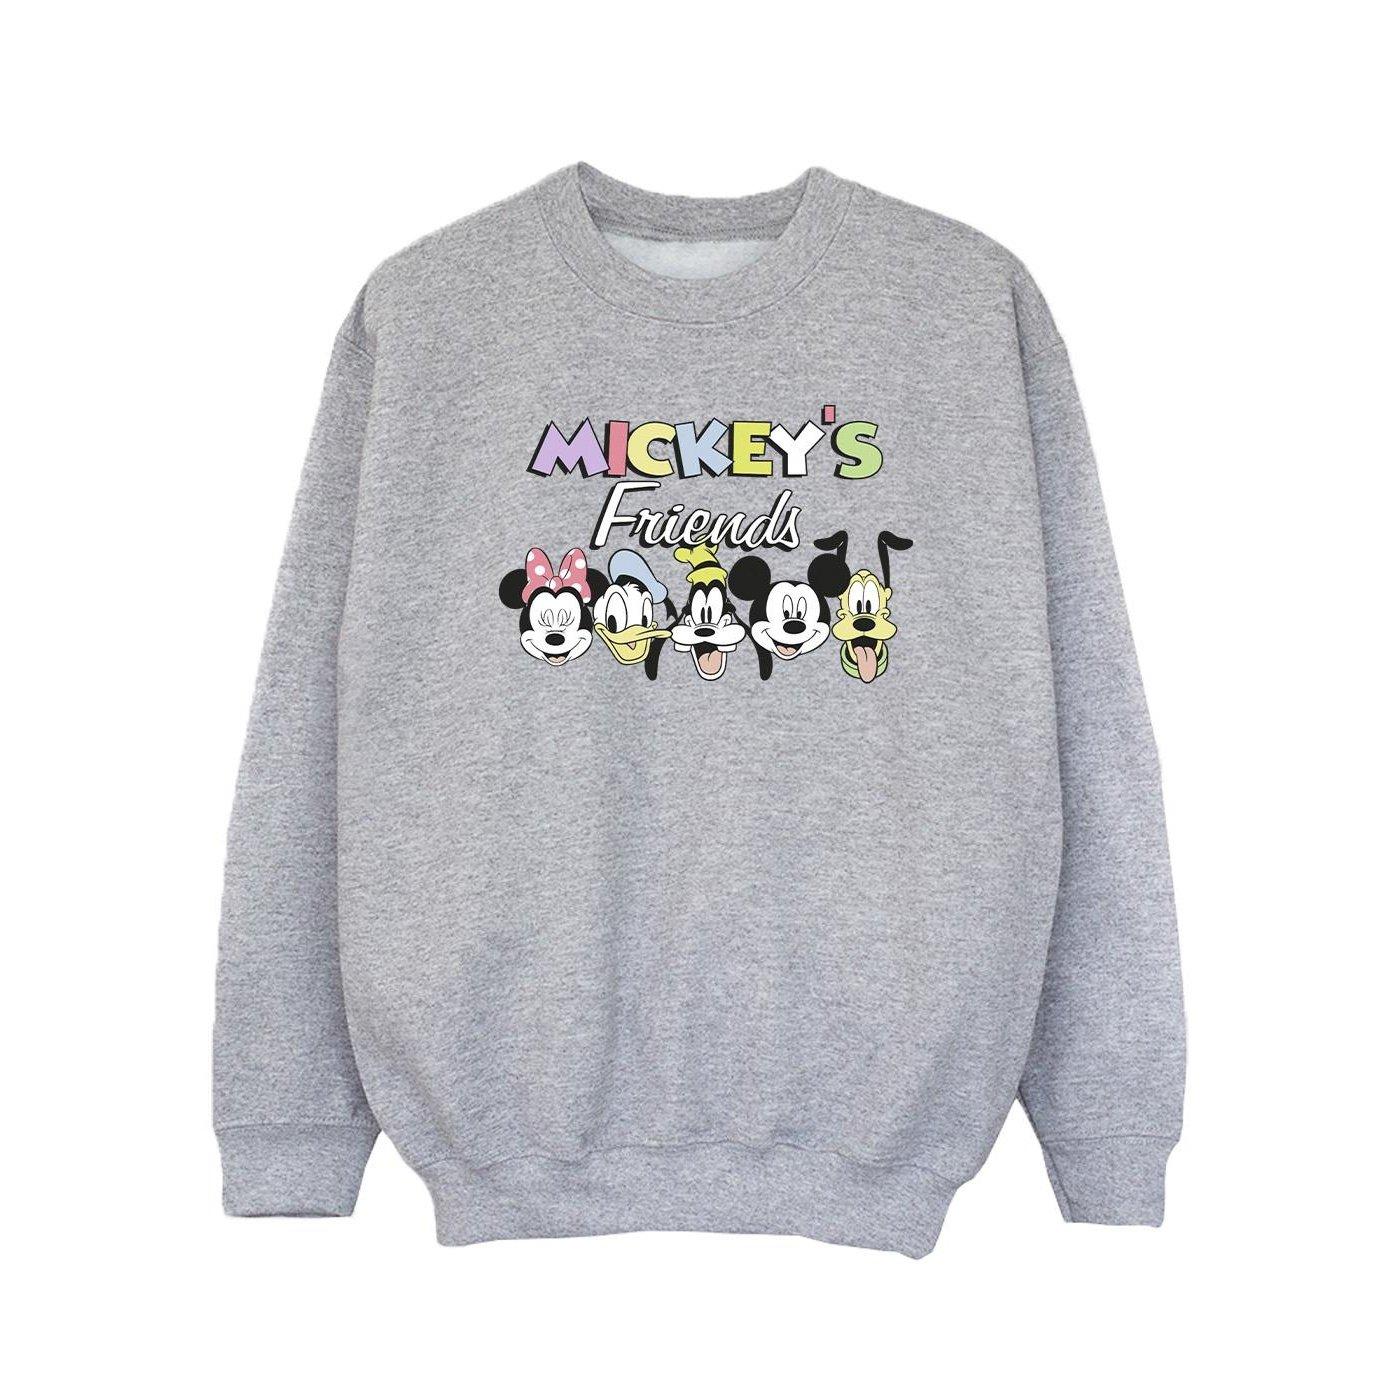 Disney  Sweat MICKEY MOUSE AND FRIENDS FACES 